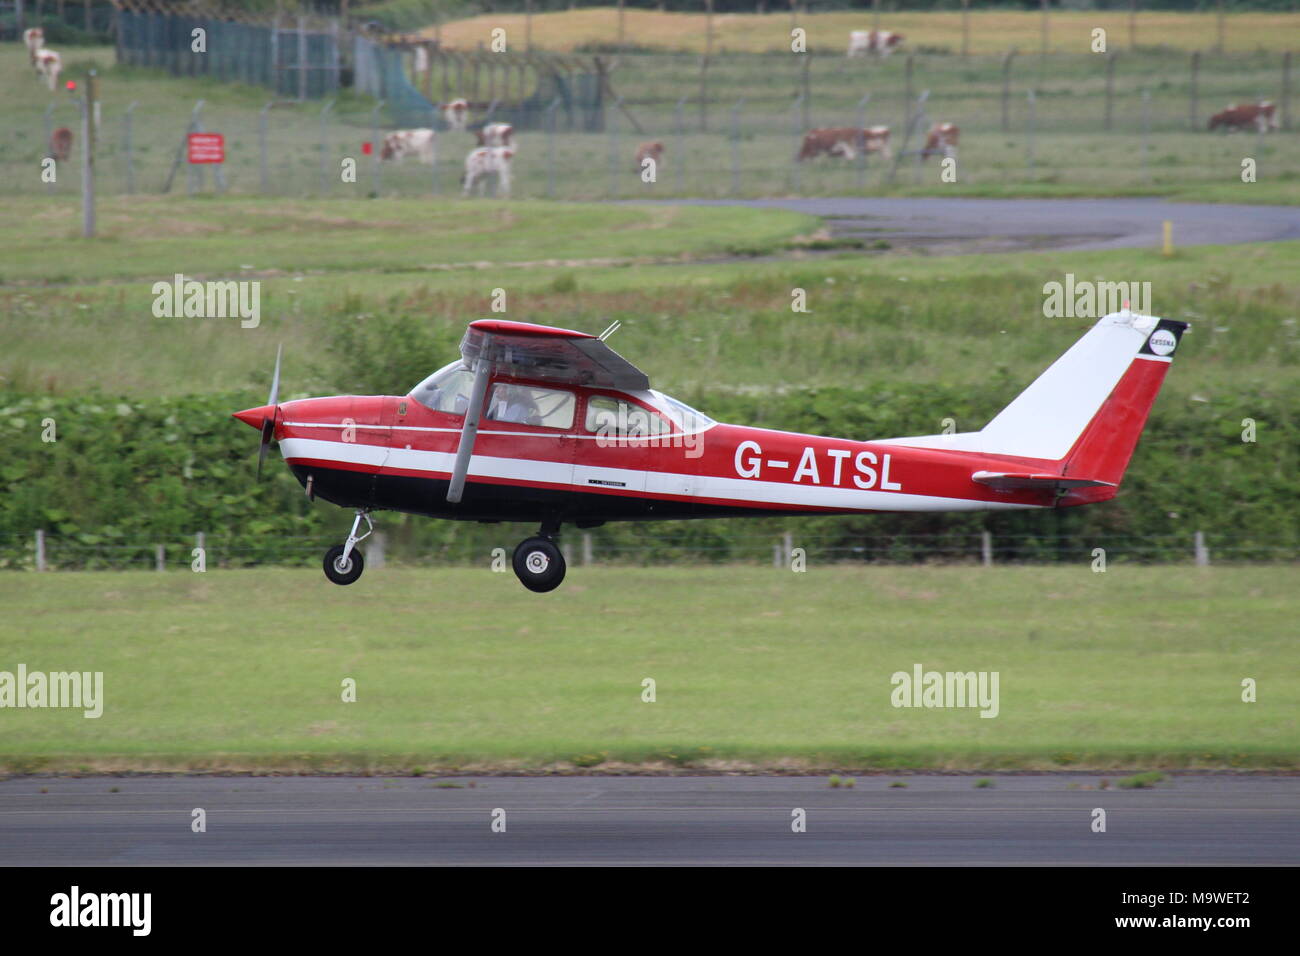 G-ATSL, a privately-owned Reims-Cessna F172G Skyhawk, at Prestwick Airport in Ayrshire. Stock Photo